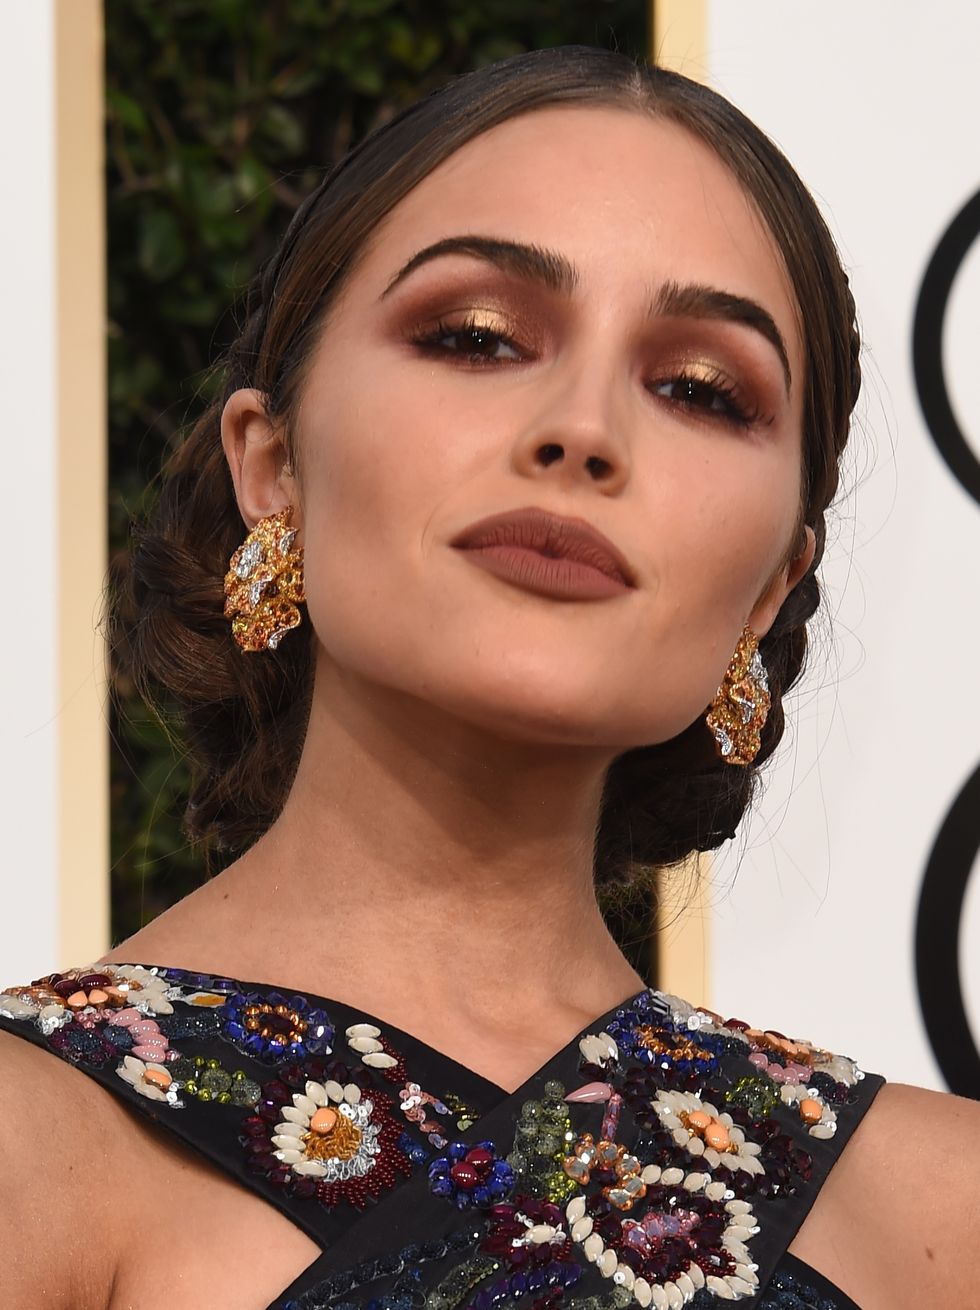 Olivia Culpo arrives at the 74th annual Golden Globe Awards, January 8, 2017, at the Beverly Hilton Hotel in Beverly Hills, California.  / AFP / VALERIE MACON        (Photo credit should read VALERIE MACON/AFP/Getty Images)